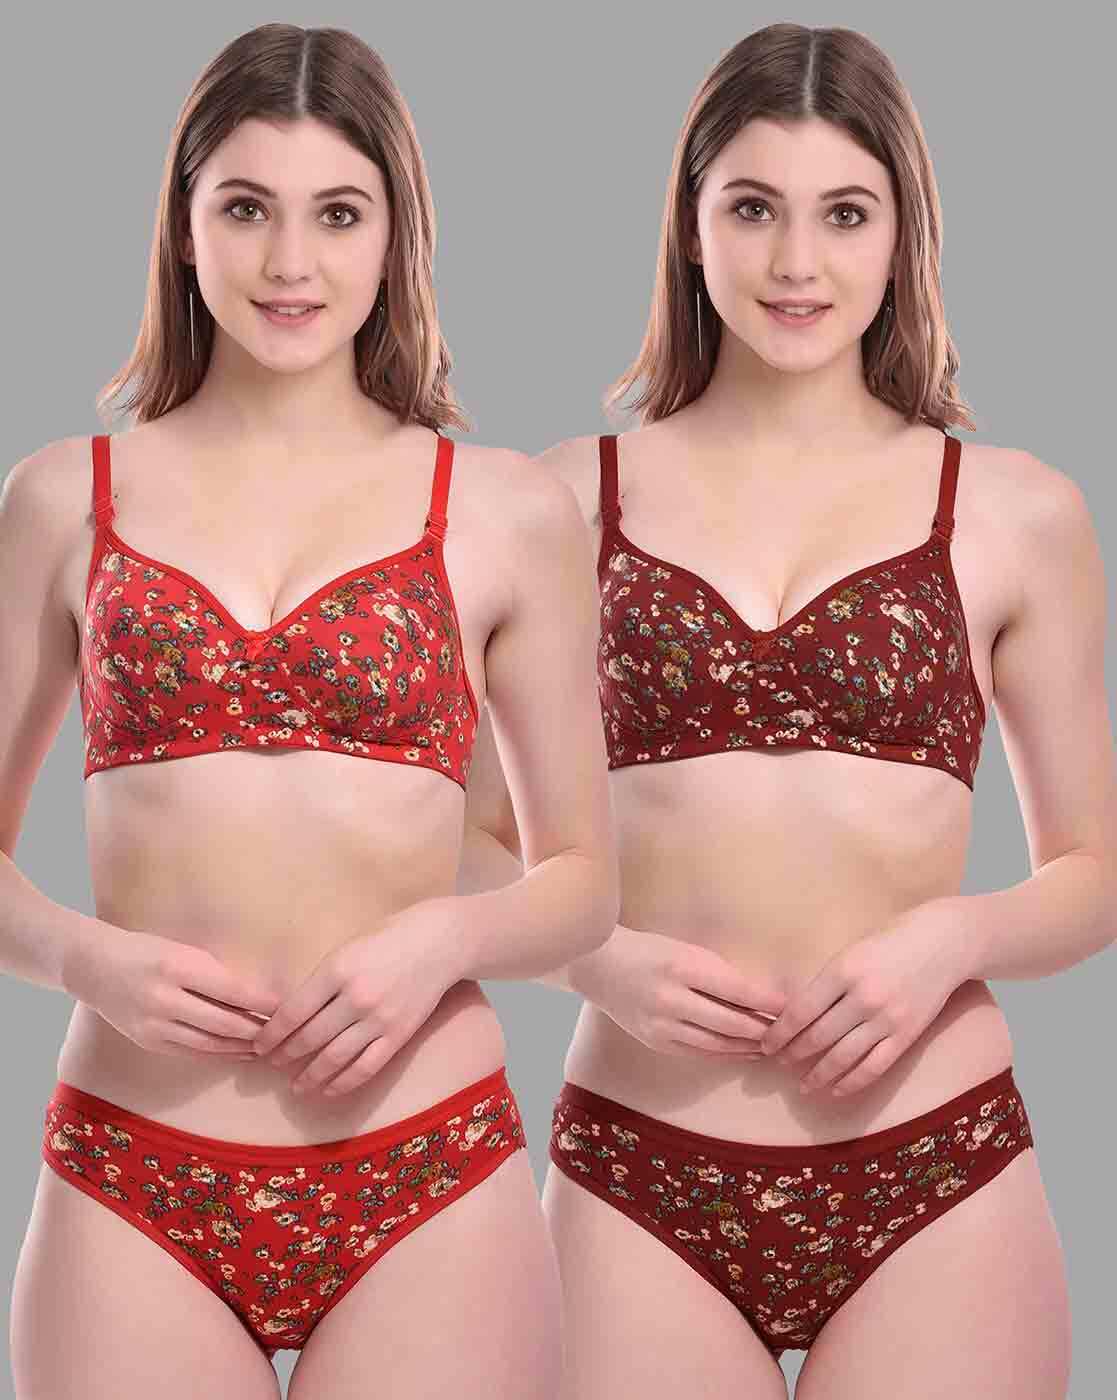 Womens Sexy Lace Bra Bralette And Panty Lingerie Set From Amyshop2, $15.14